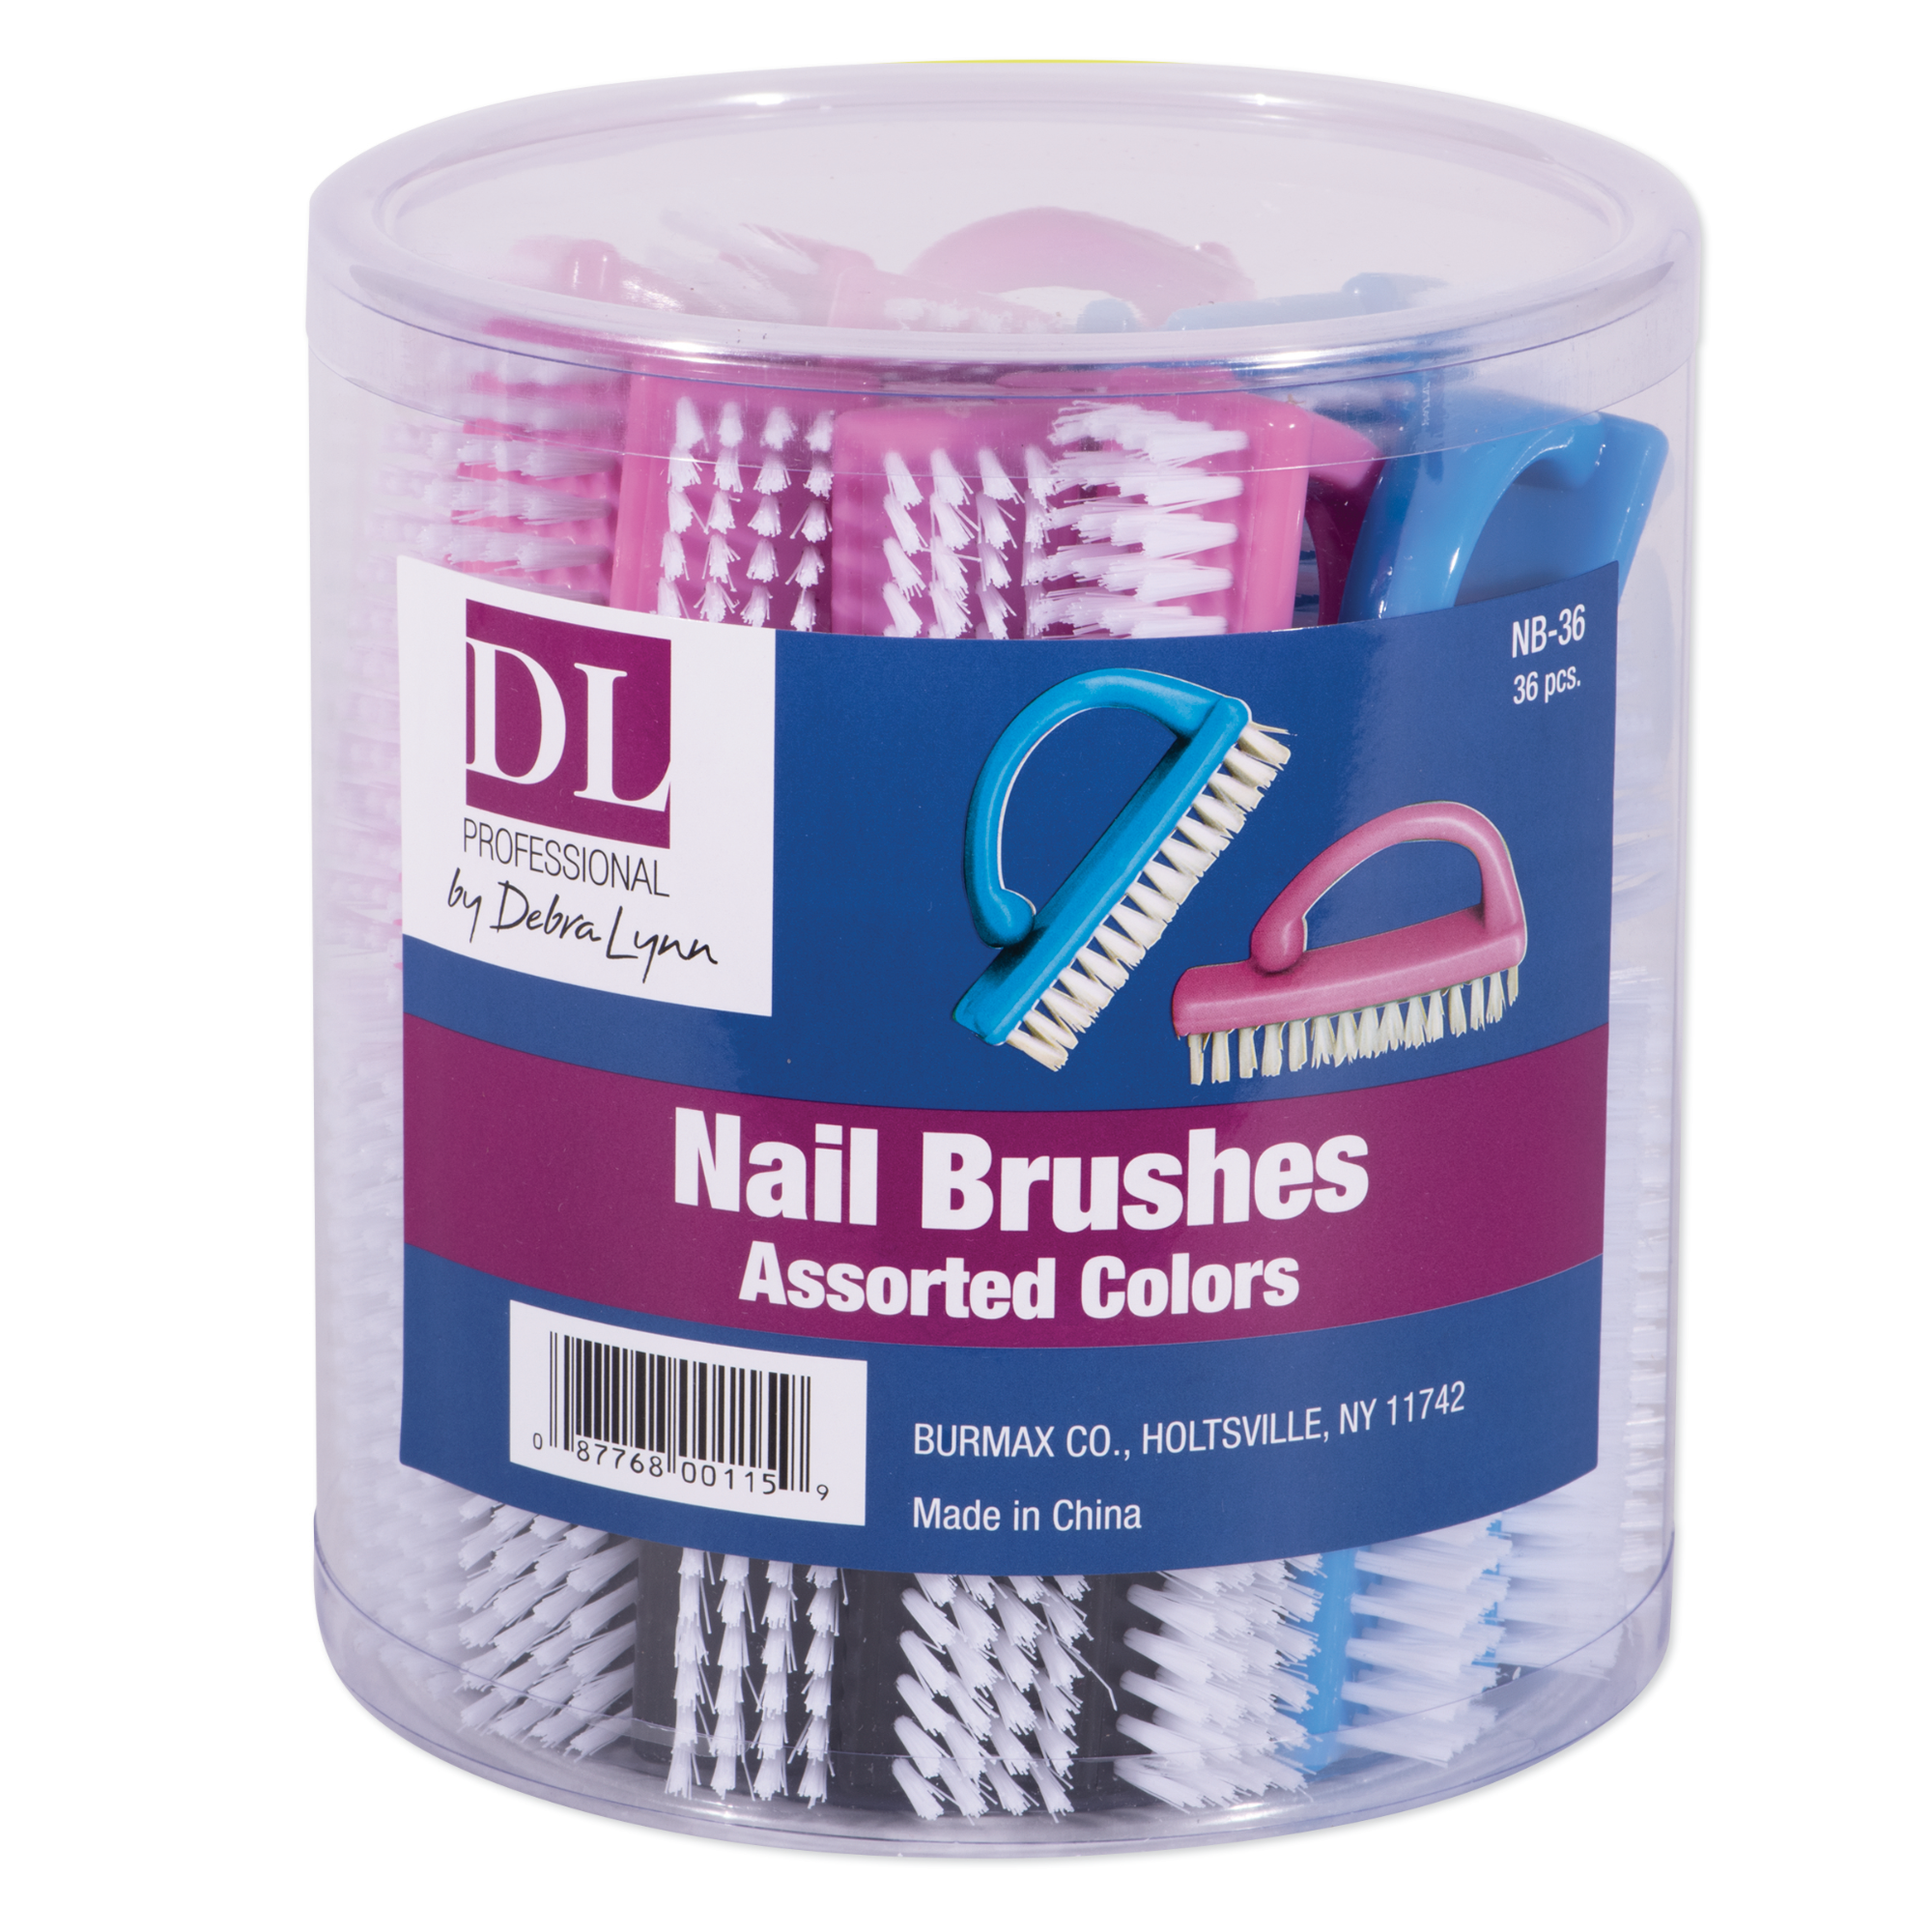 Manicure Brushes in a Container